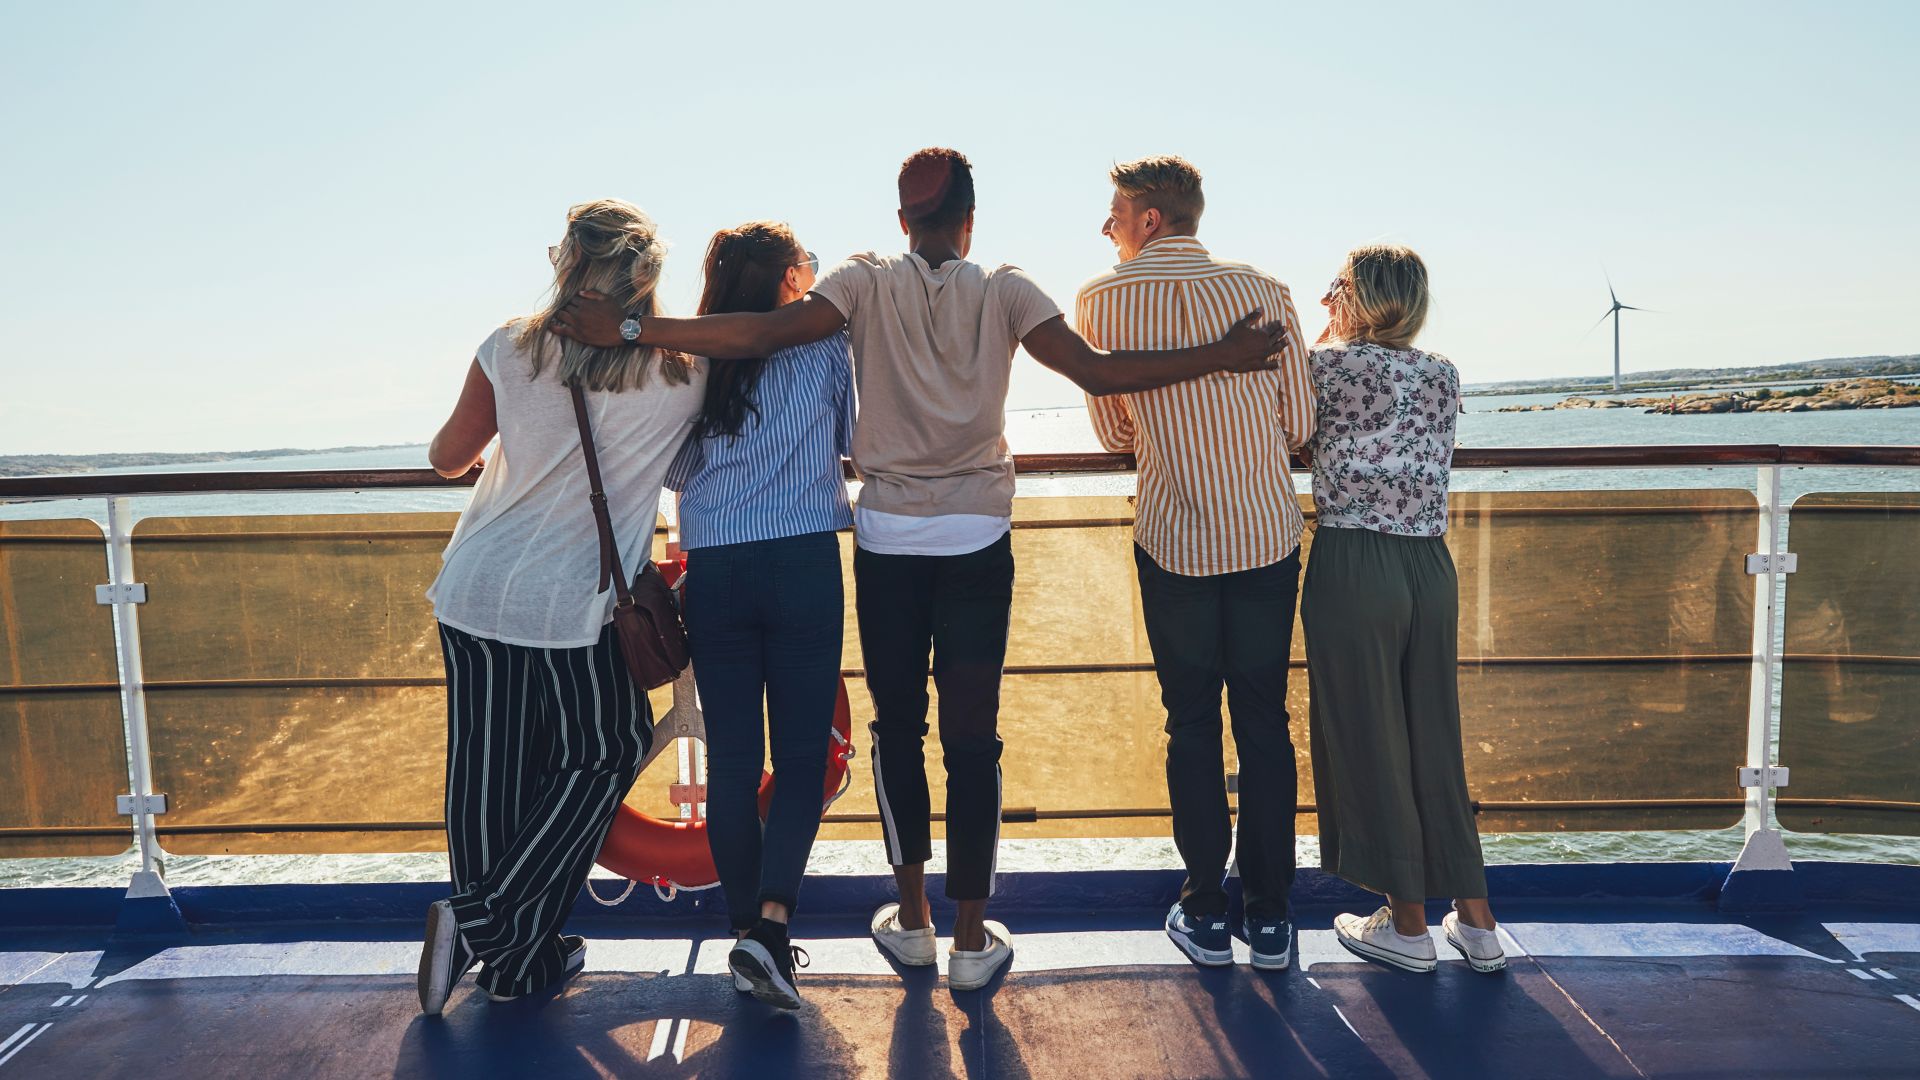 View from behind of a group of 5 friends on the sundeck of a ferry looking out to sea